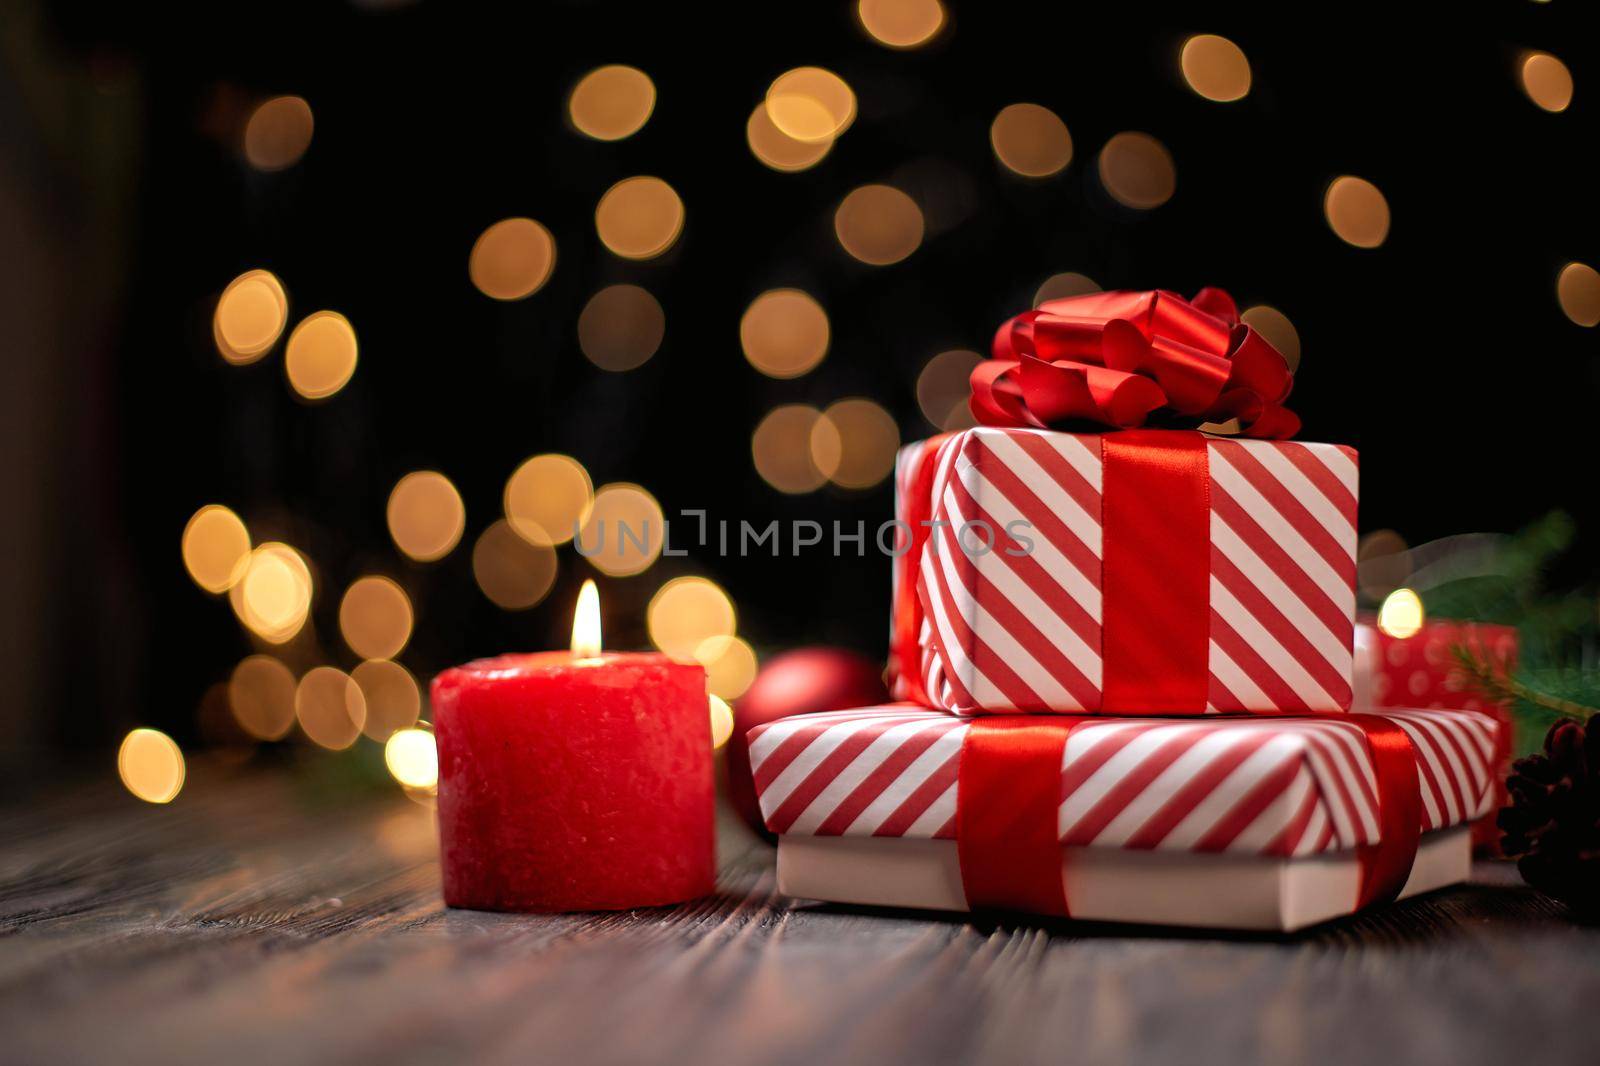 candle and gift boxes on the background of Christmas lights. photo with a copy-space.